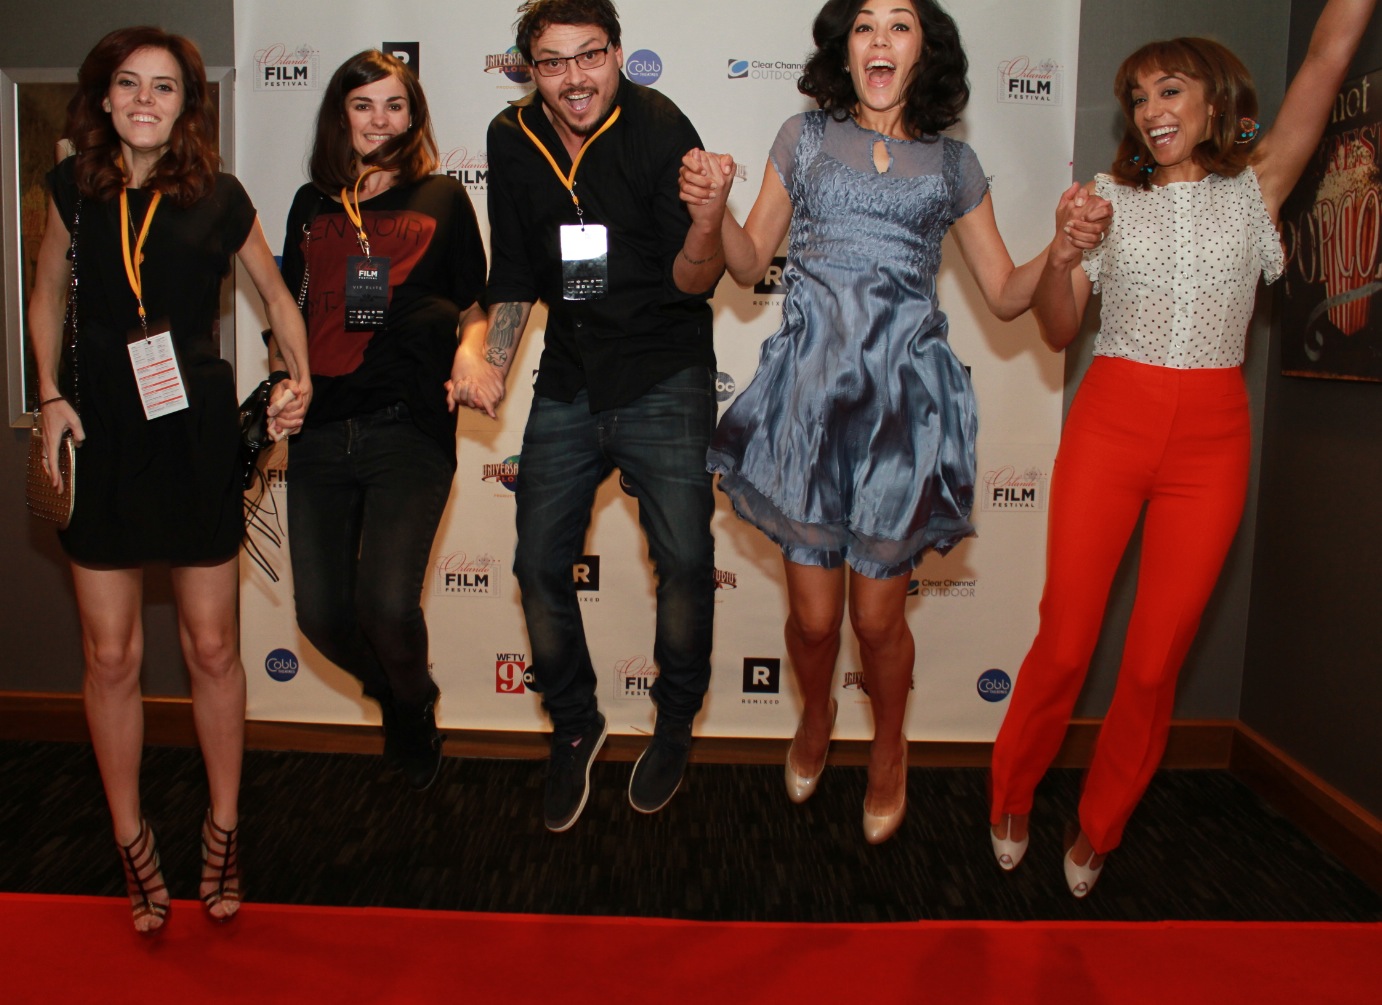 Adriana Mather, Anya Remizova, James Bird, Mishel Prada, and Leah Briese on the Red Carpet at the Orlando Film Festival